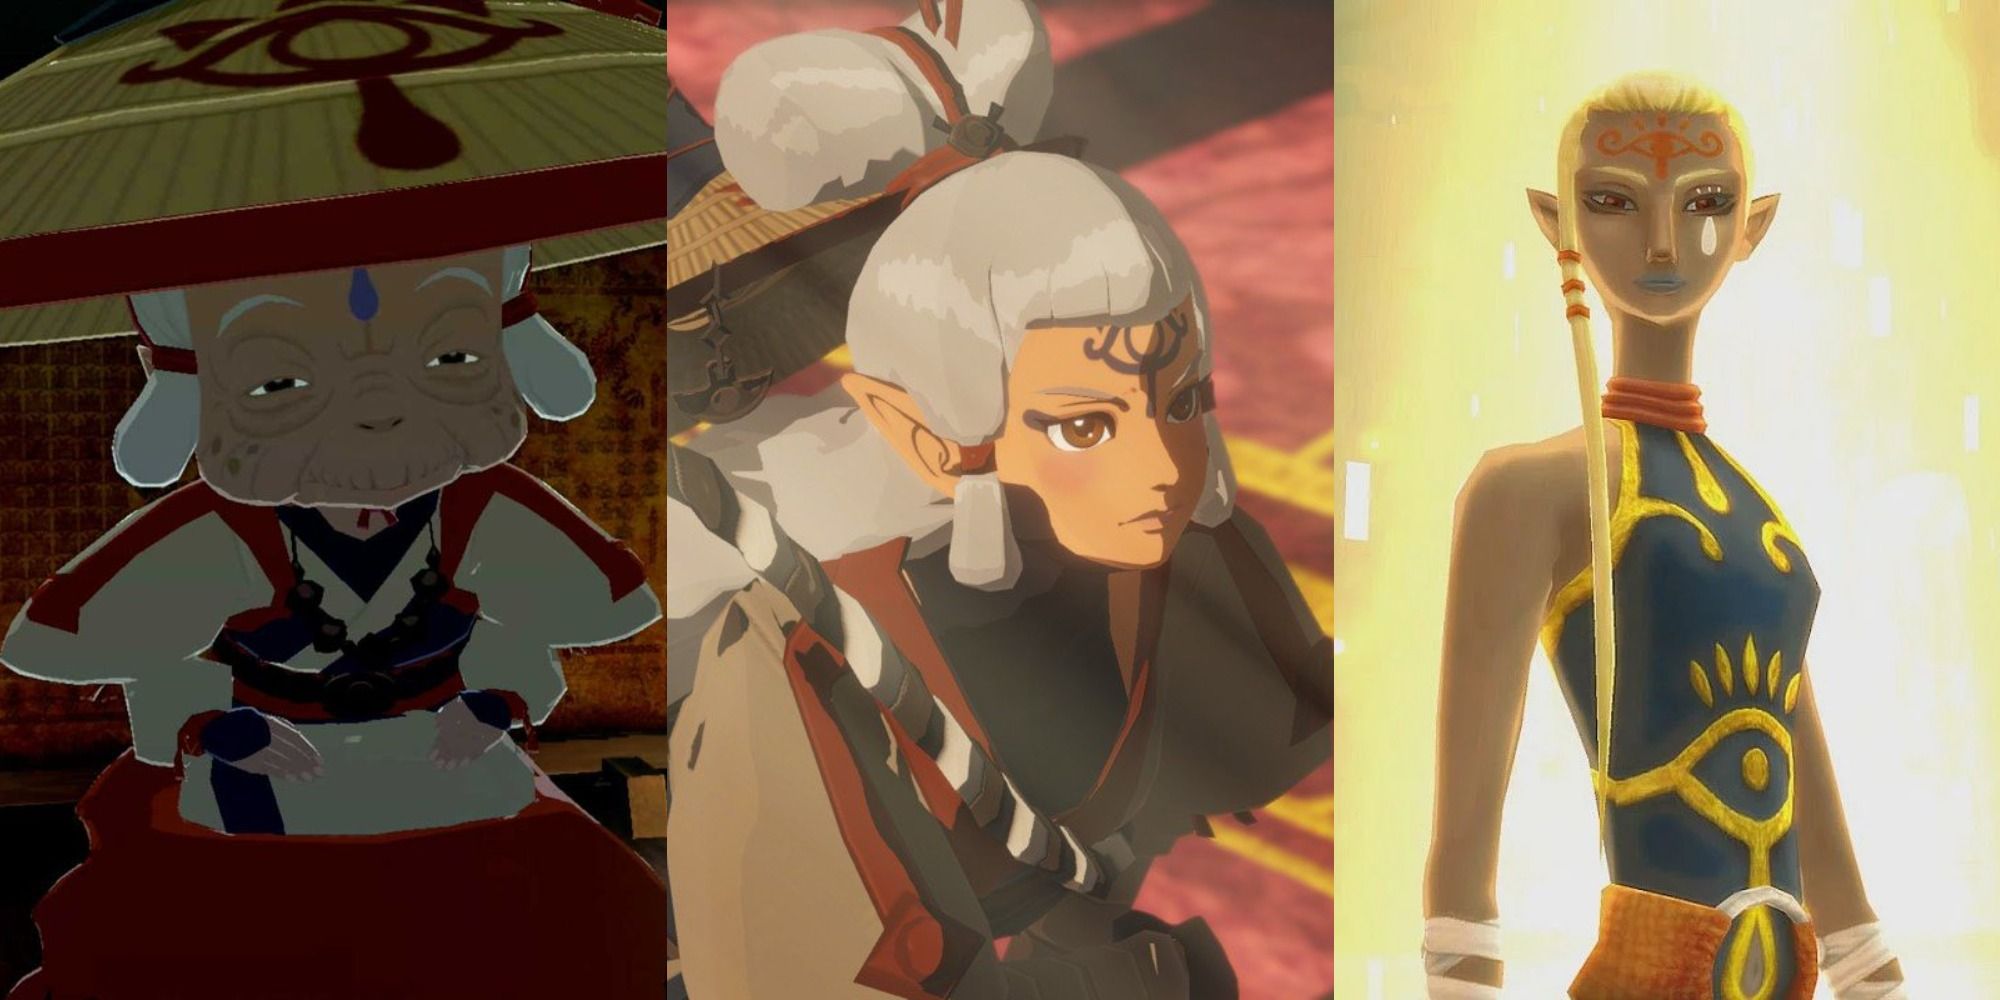 Why is Impa old?